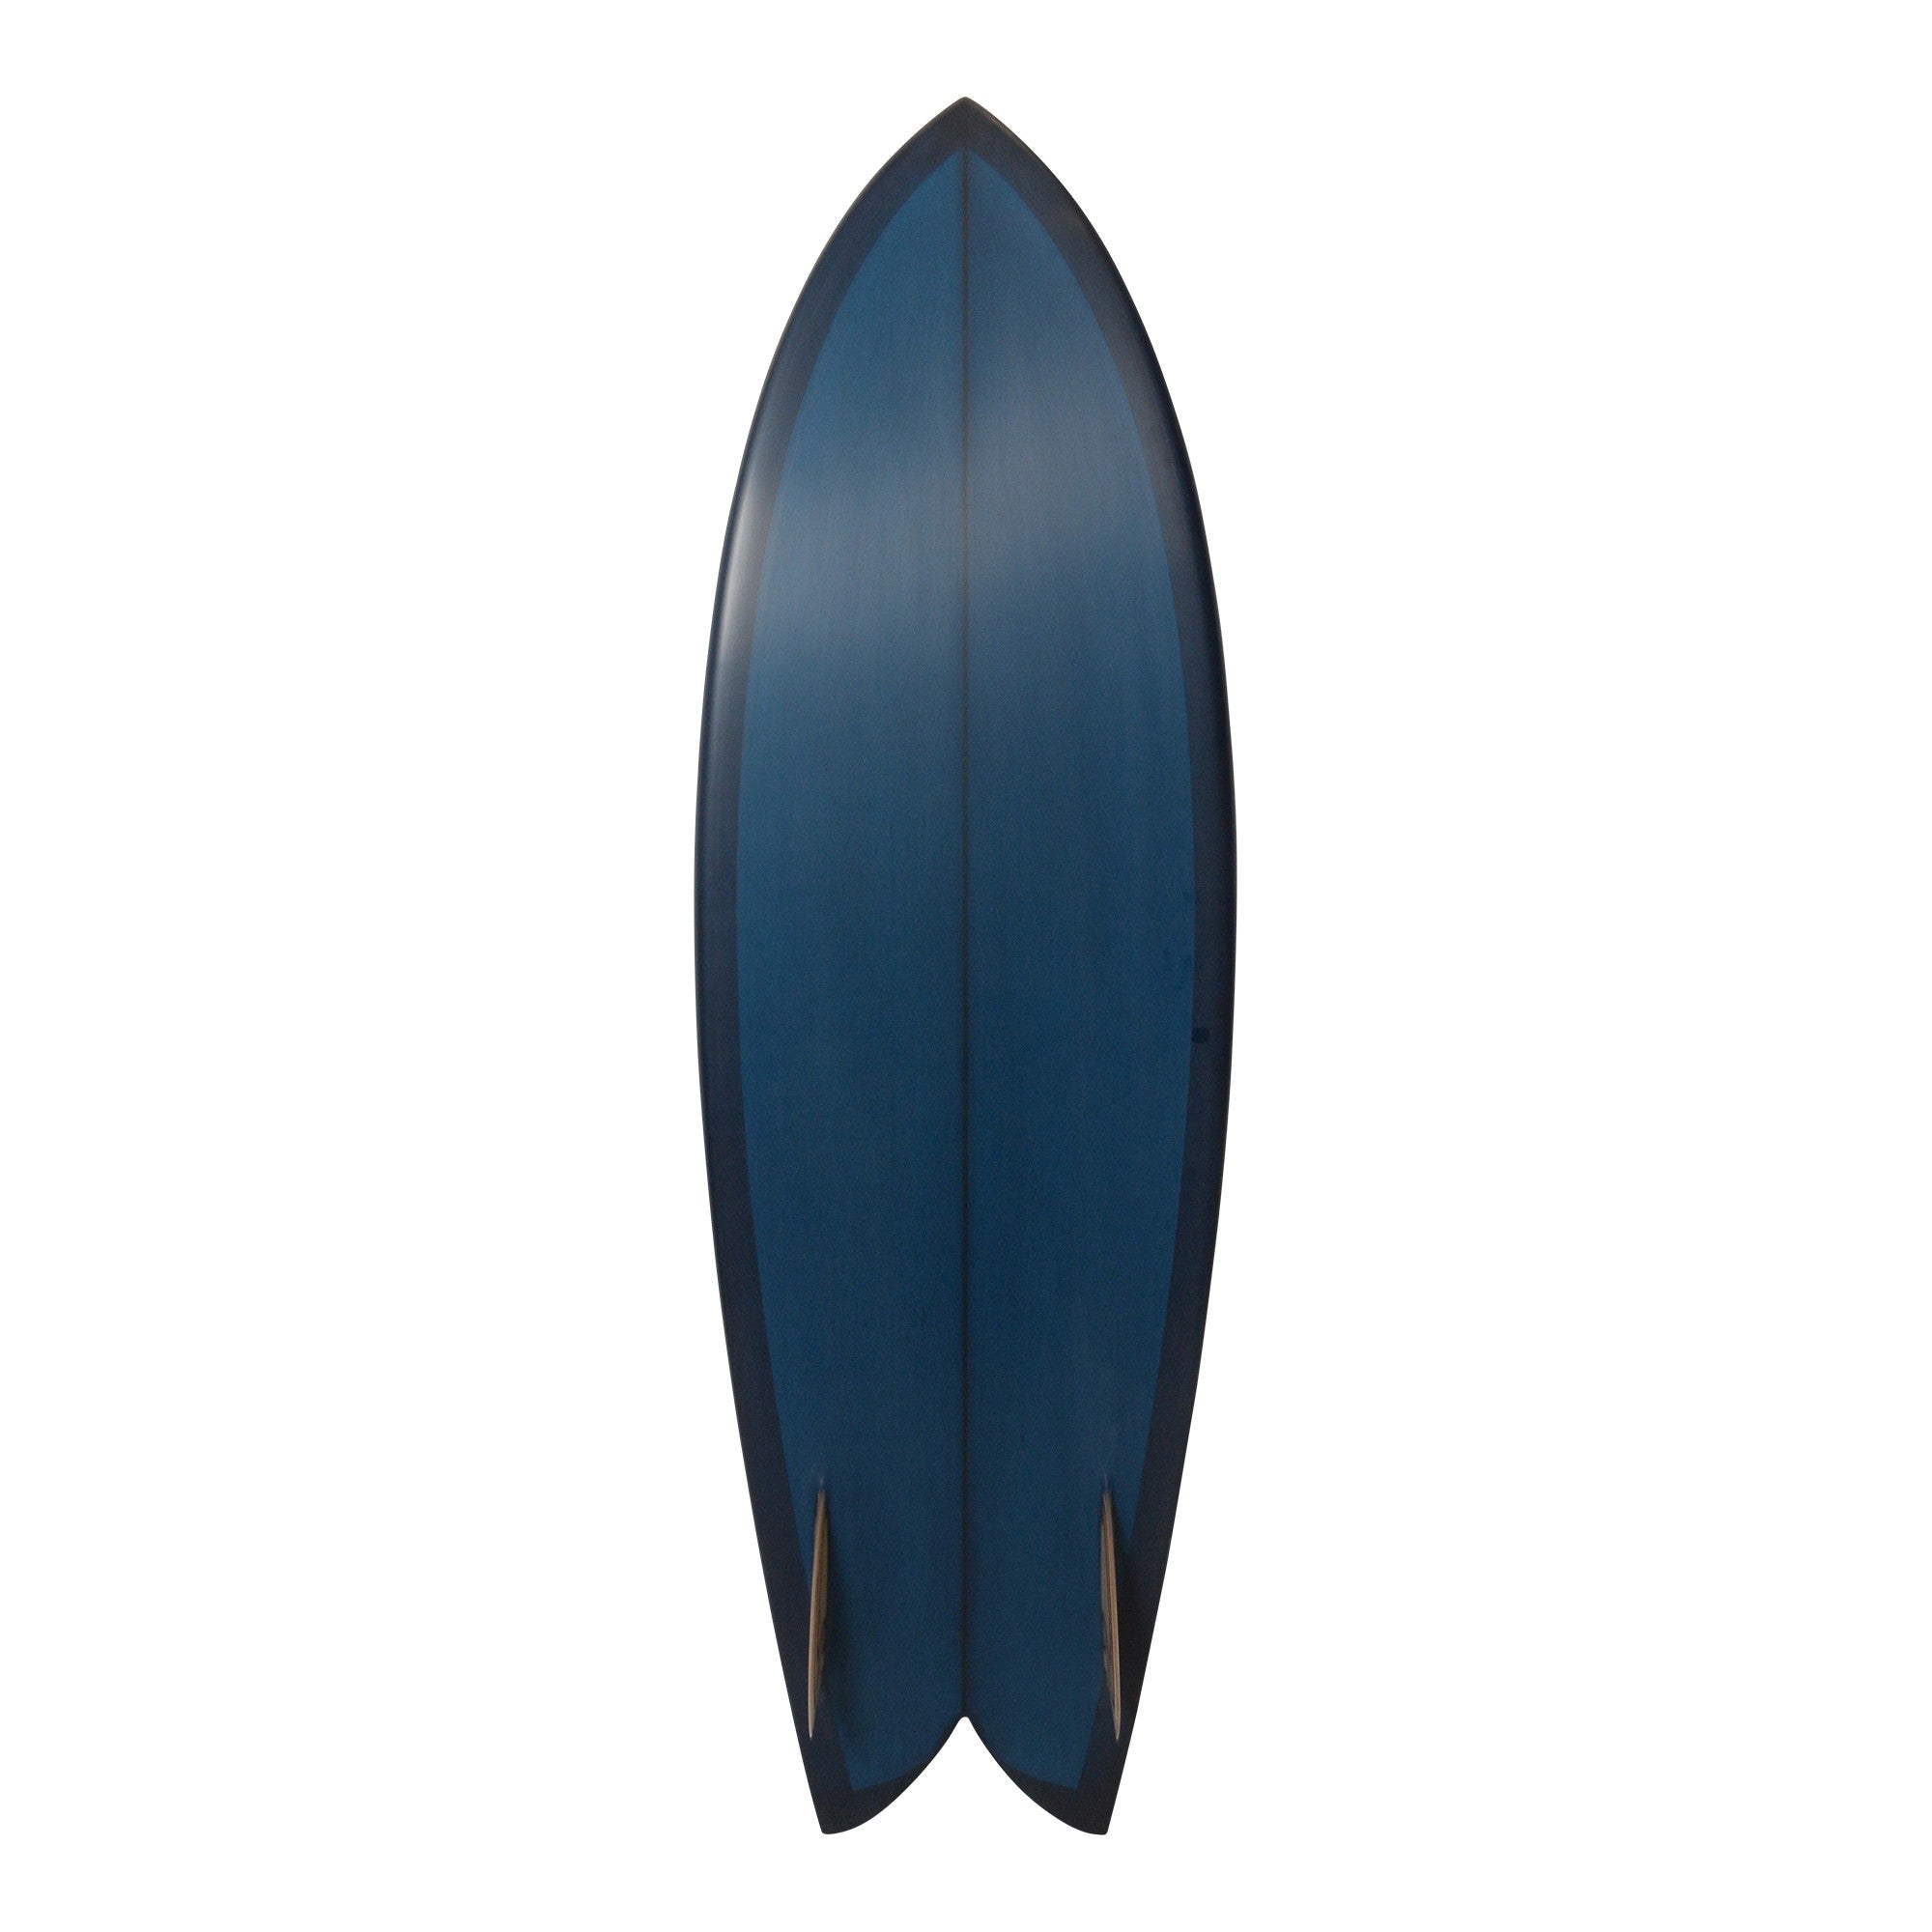 ELMORE Surfboards - Fish 5'8 (PU) Glass On Fins- Navy